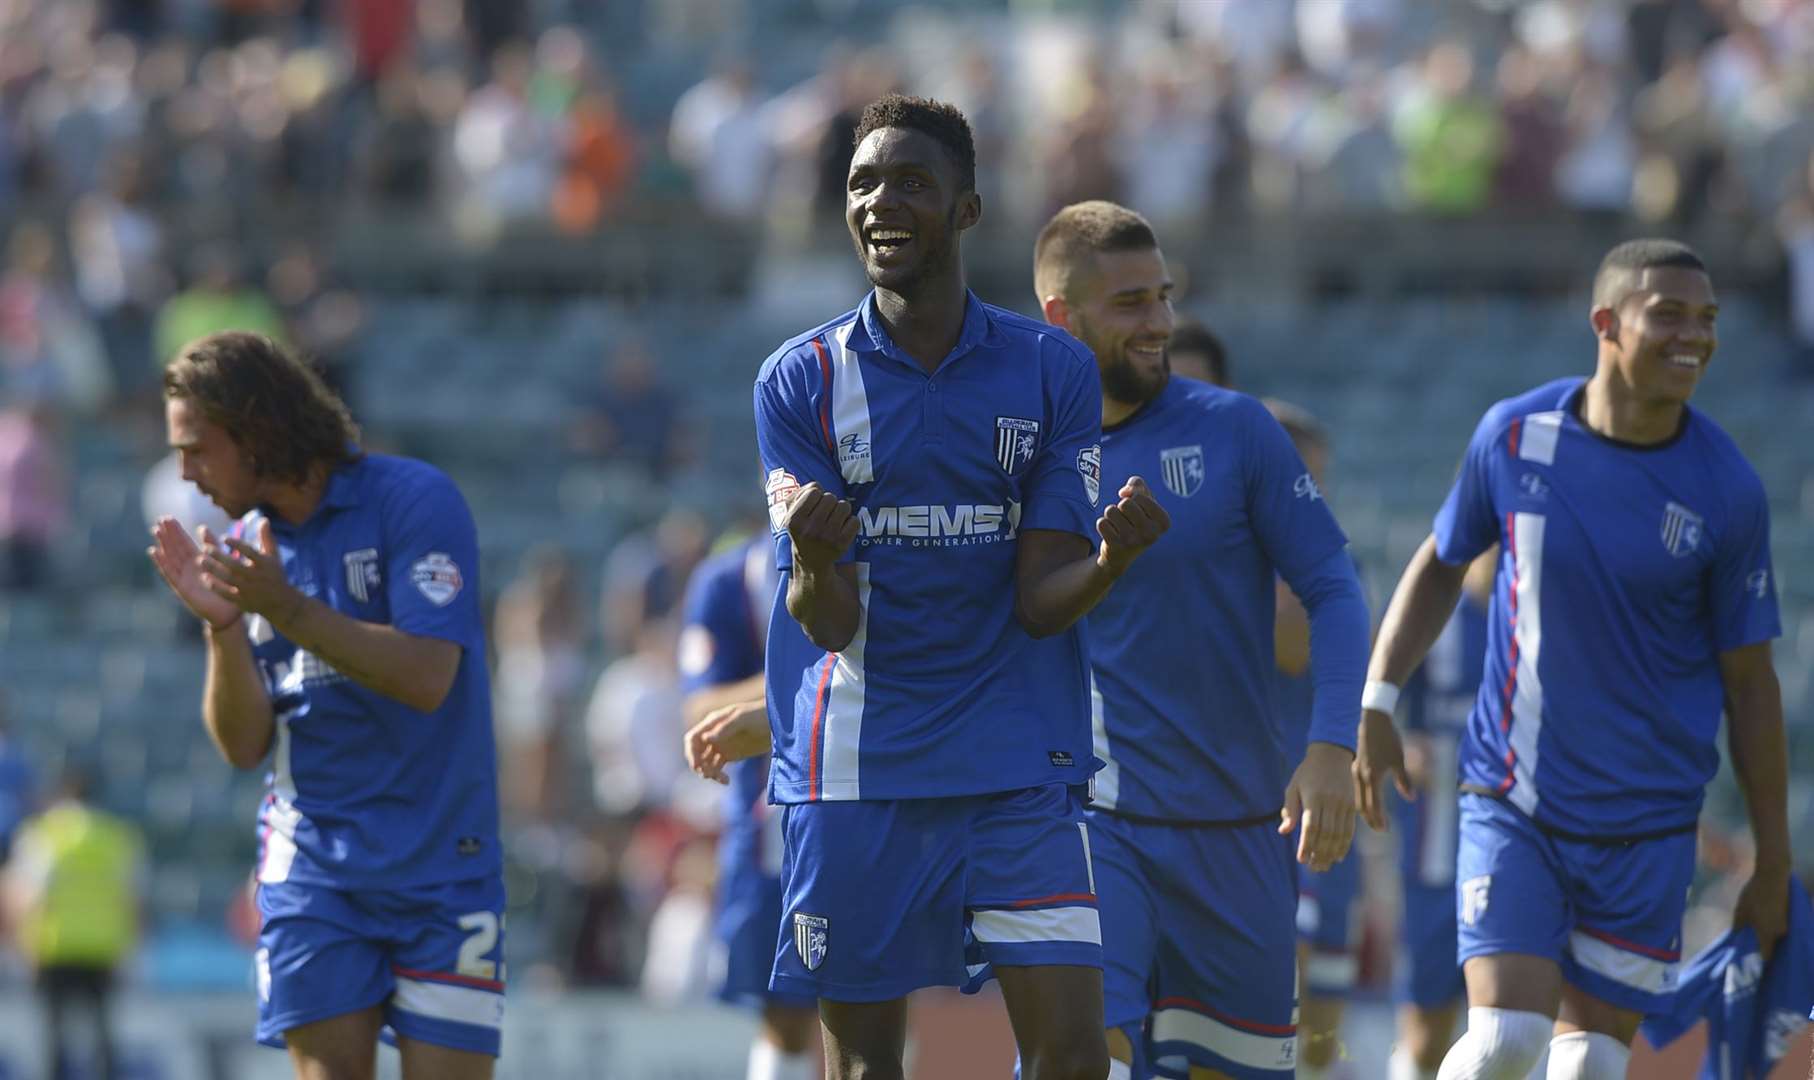 One of Emmanuel Osadebe’s highlights was a man-of-the-match performance against Sheffield United in a big win at Priestfield